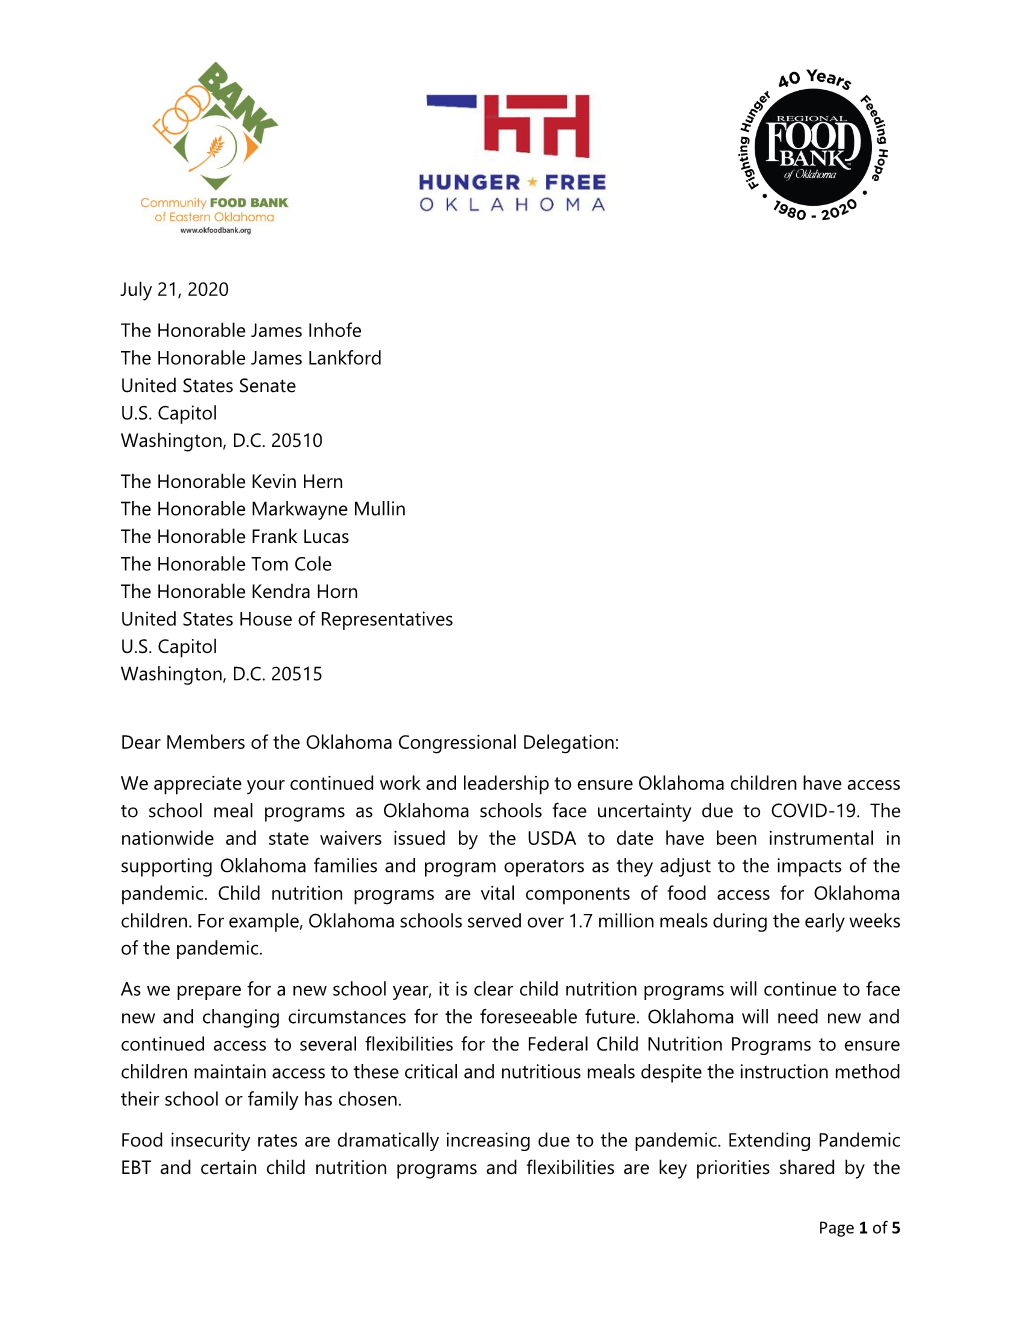 Covid19 July 2020 Child Nutrition Letter